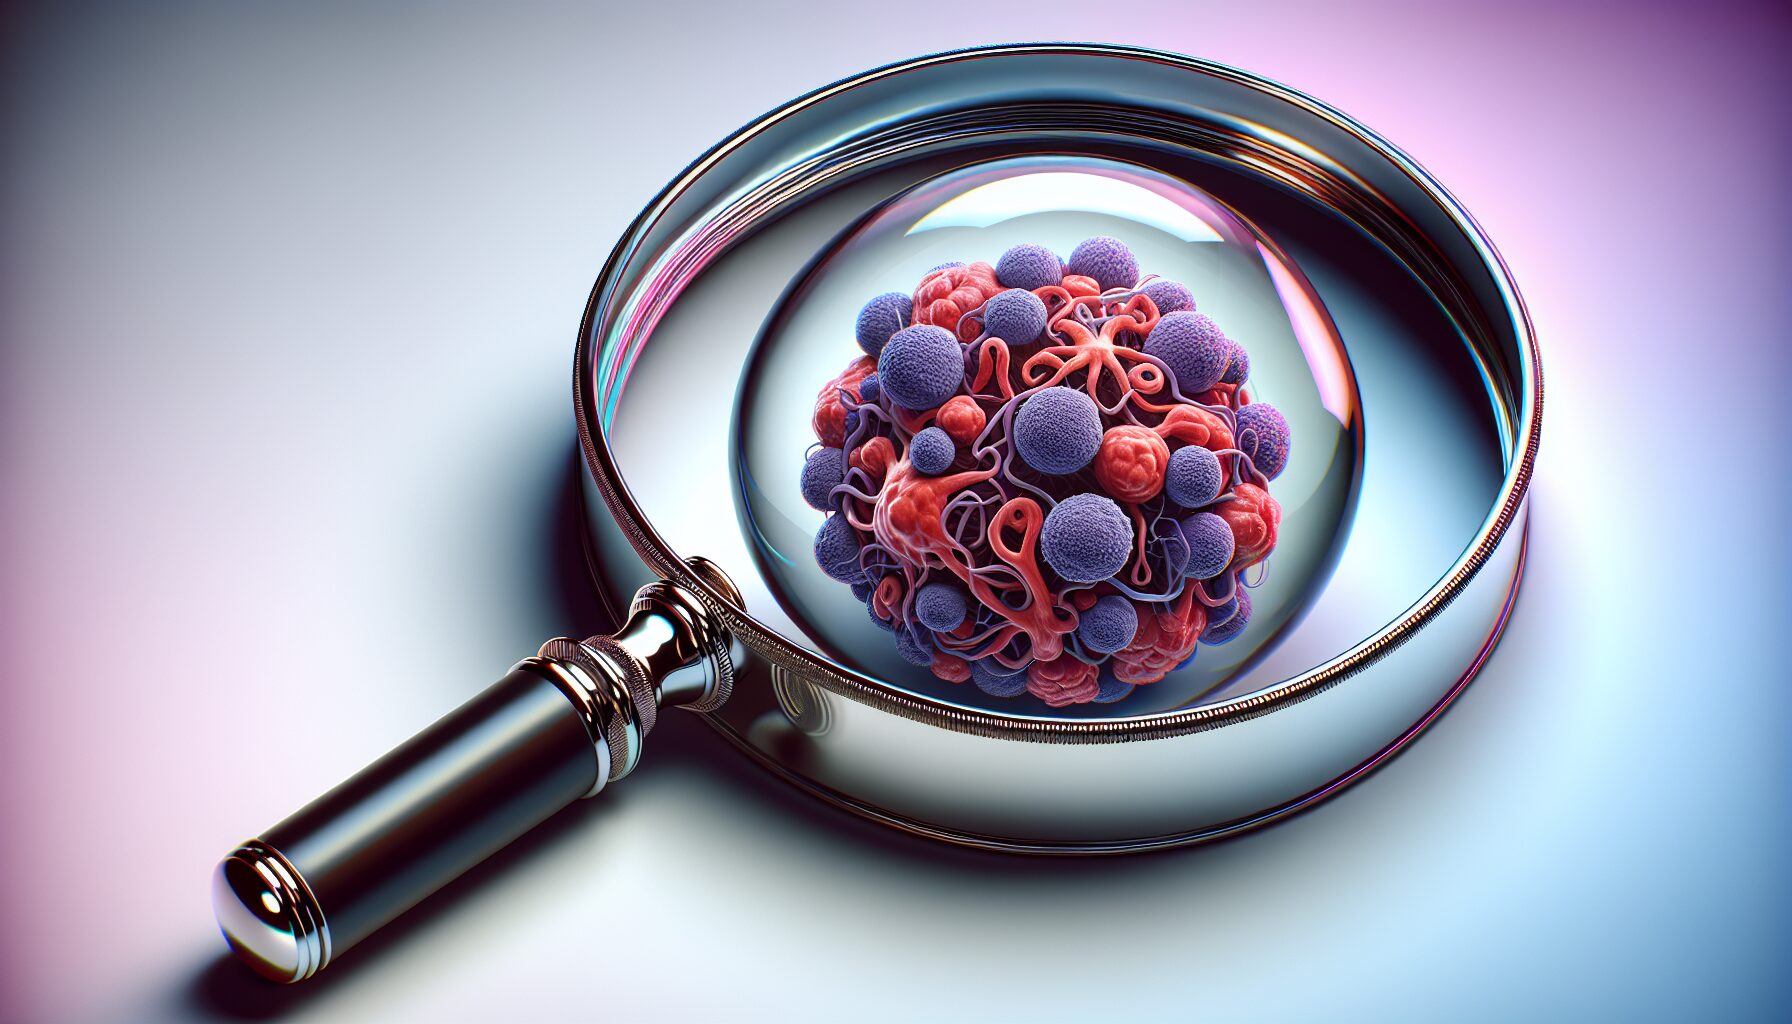 Illustration of a magnifying glass focusing on cancer cells, serious medical conditions